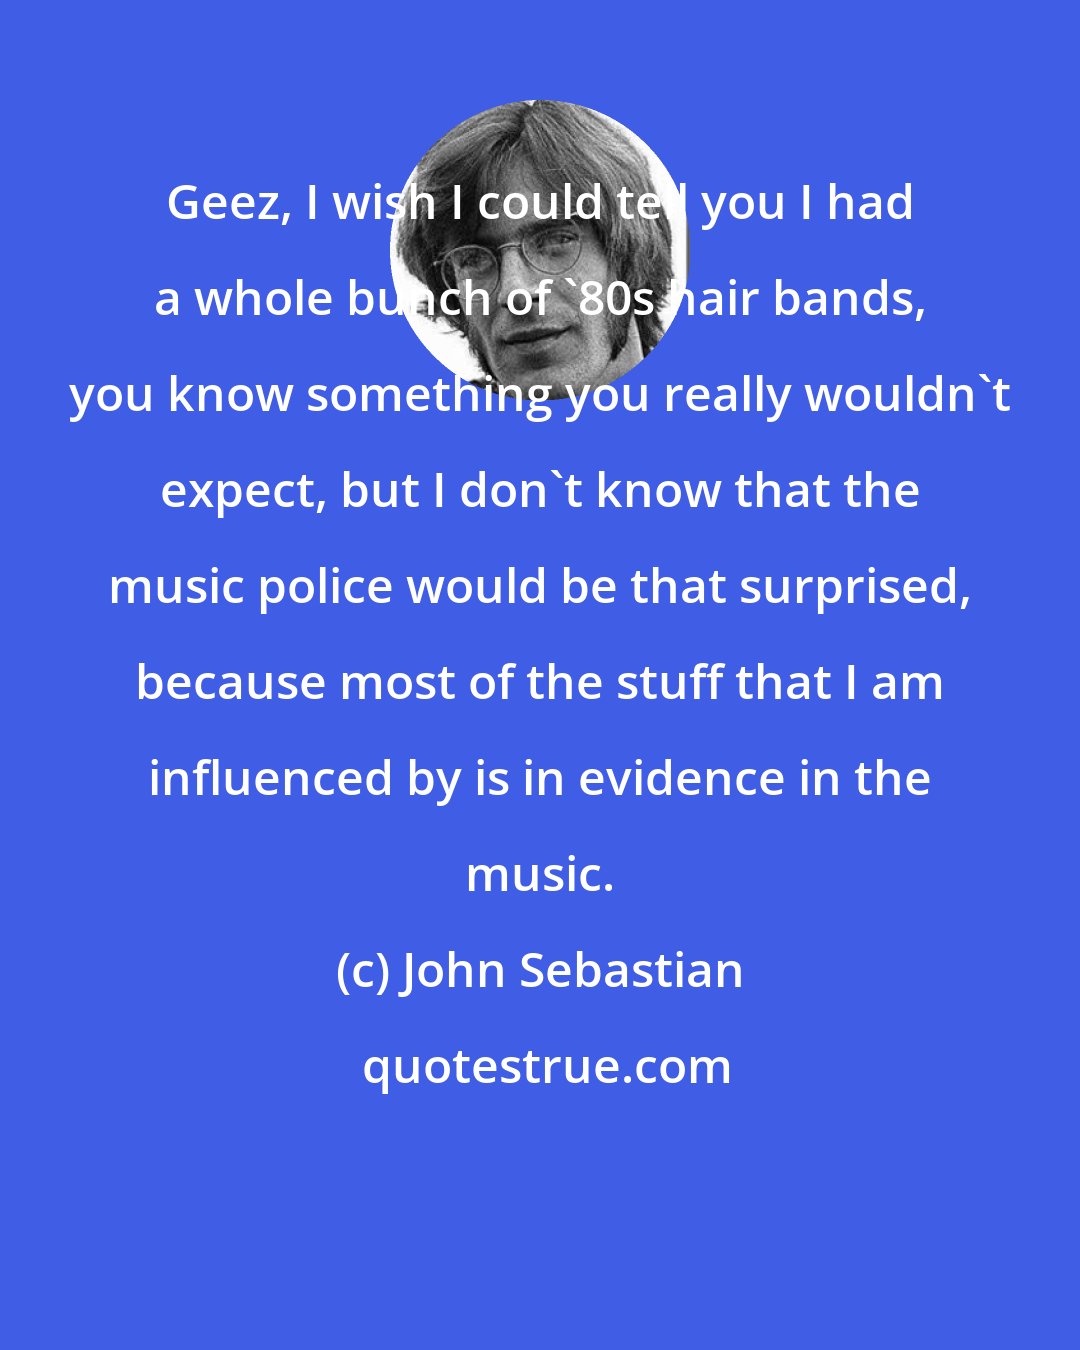 John Sebastian: Geez, I wish I could tell you I had a whole bunch of '80s hair bands, you know something you really wouldn't expect, but I don't know that the music police would be that surprised, because most of the stuff that I am influenced by is in evidence in the music.